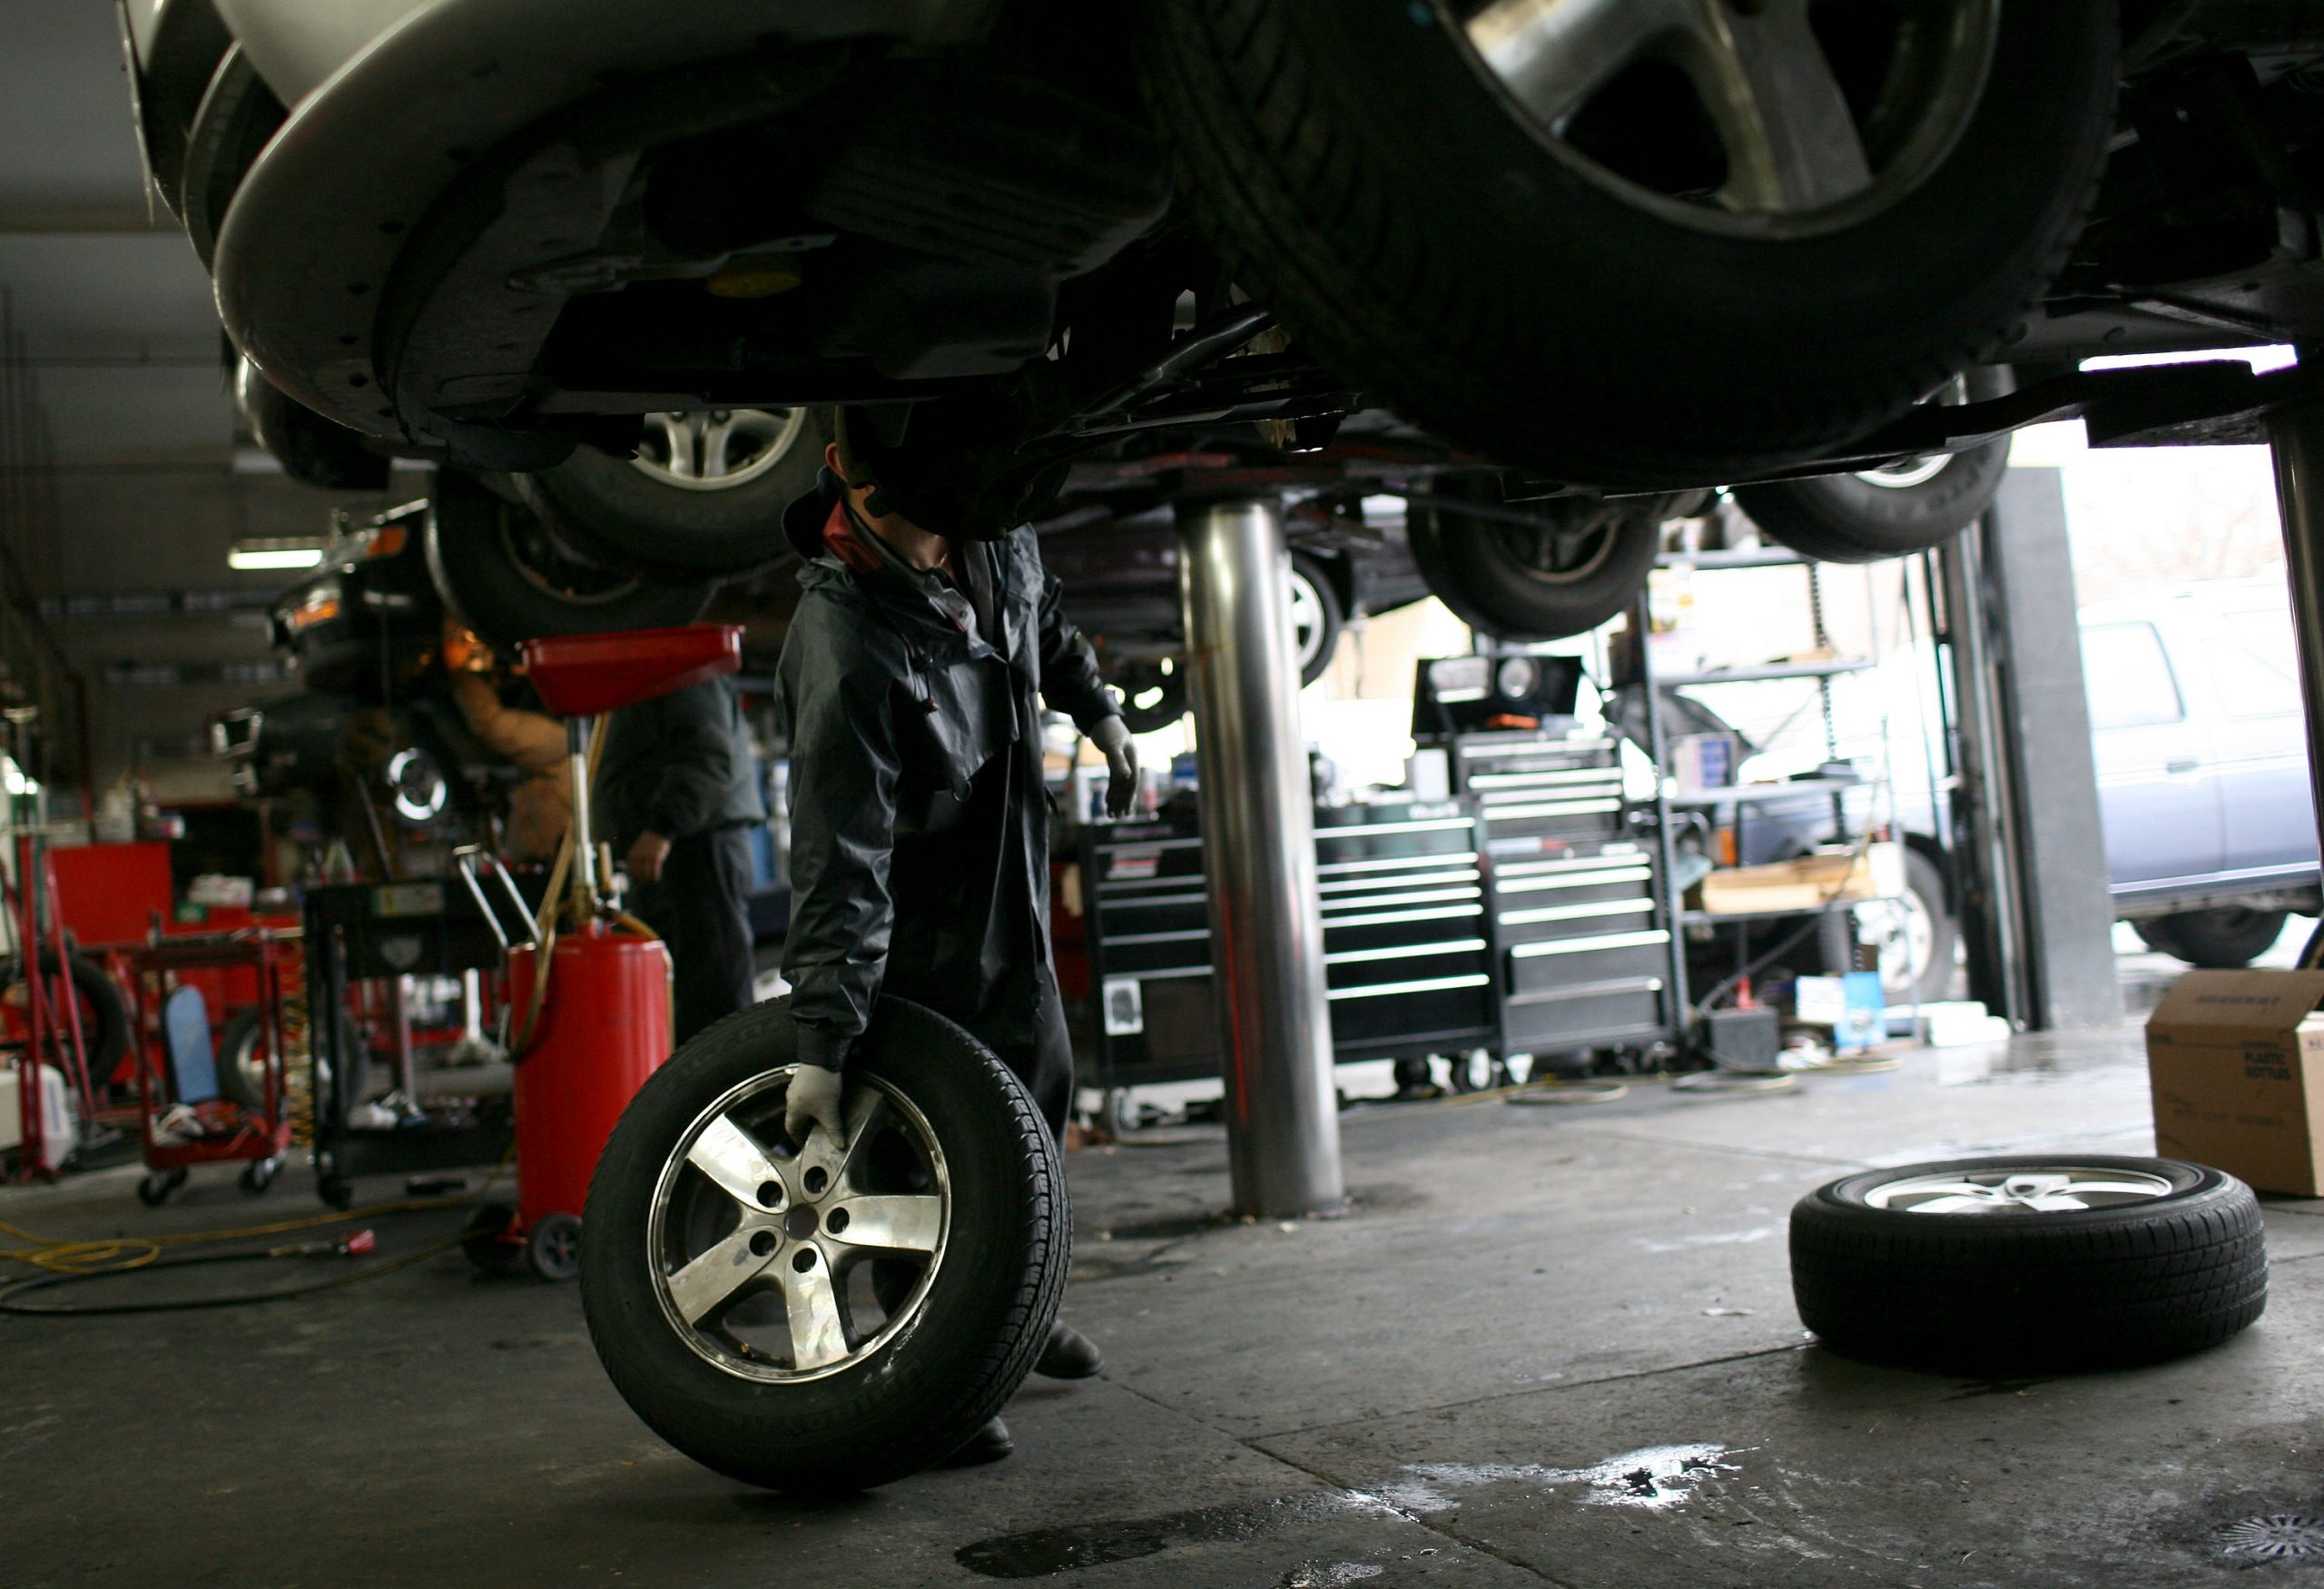 Mechanics work in a shop, removing the wheel of a car on a lift